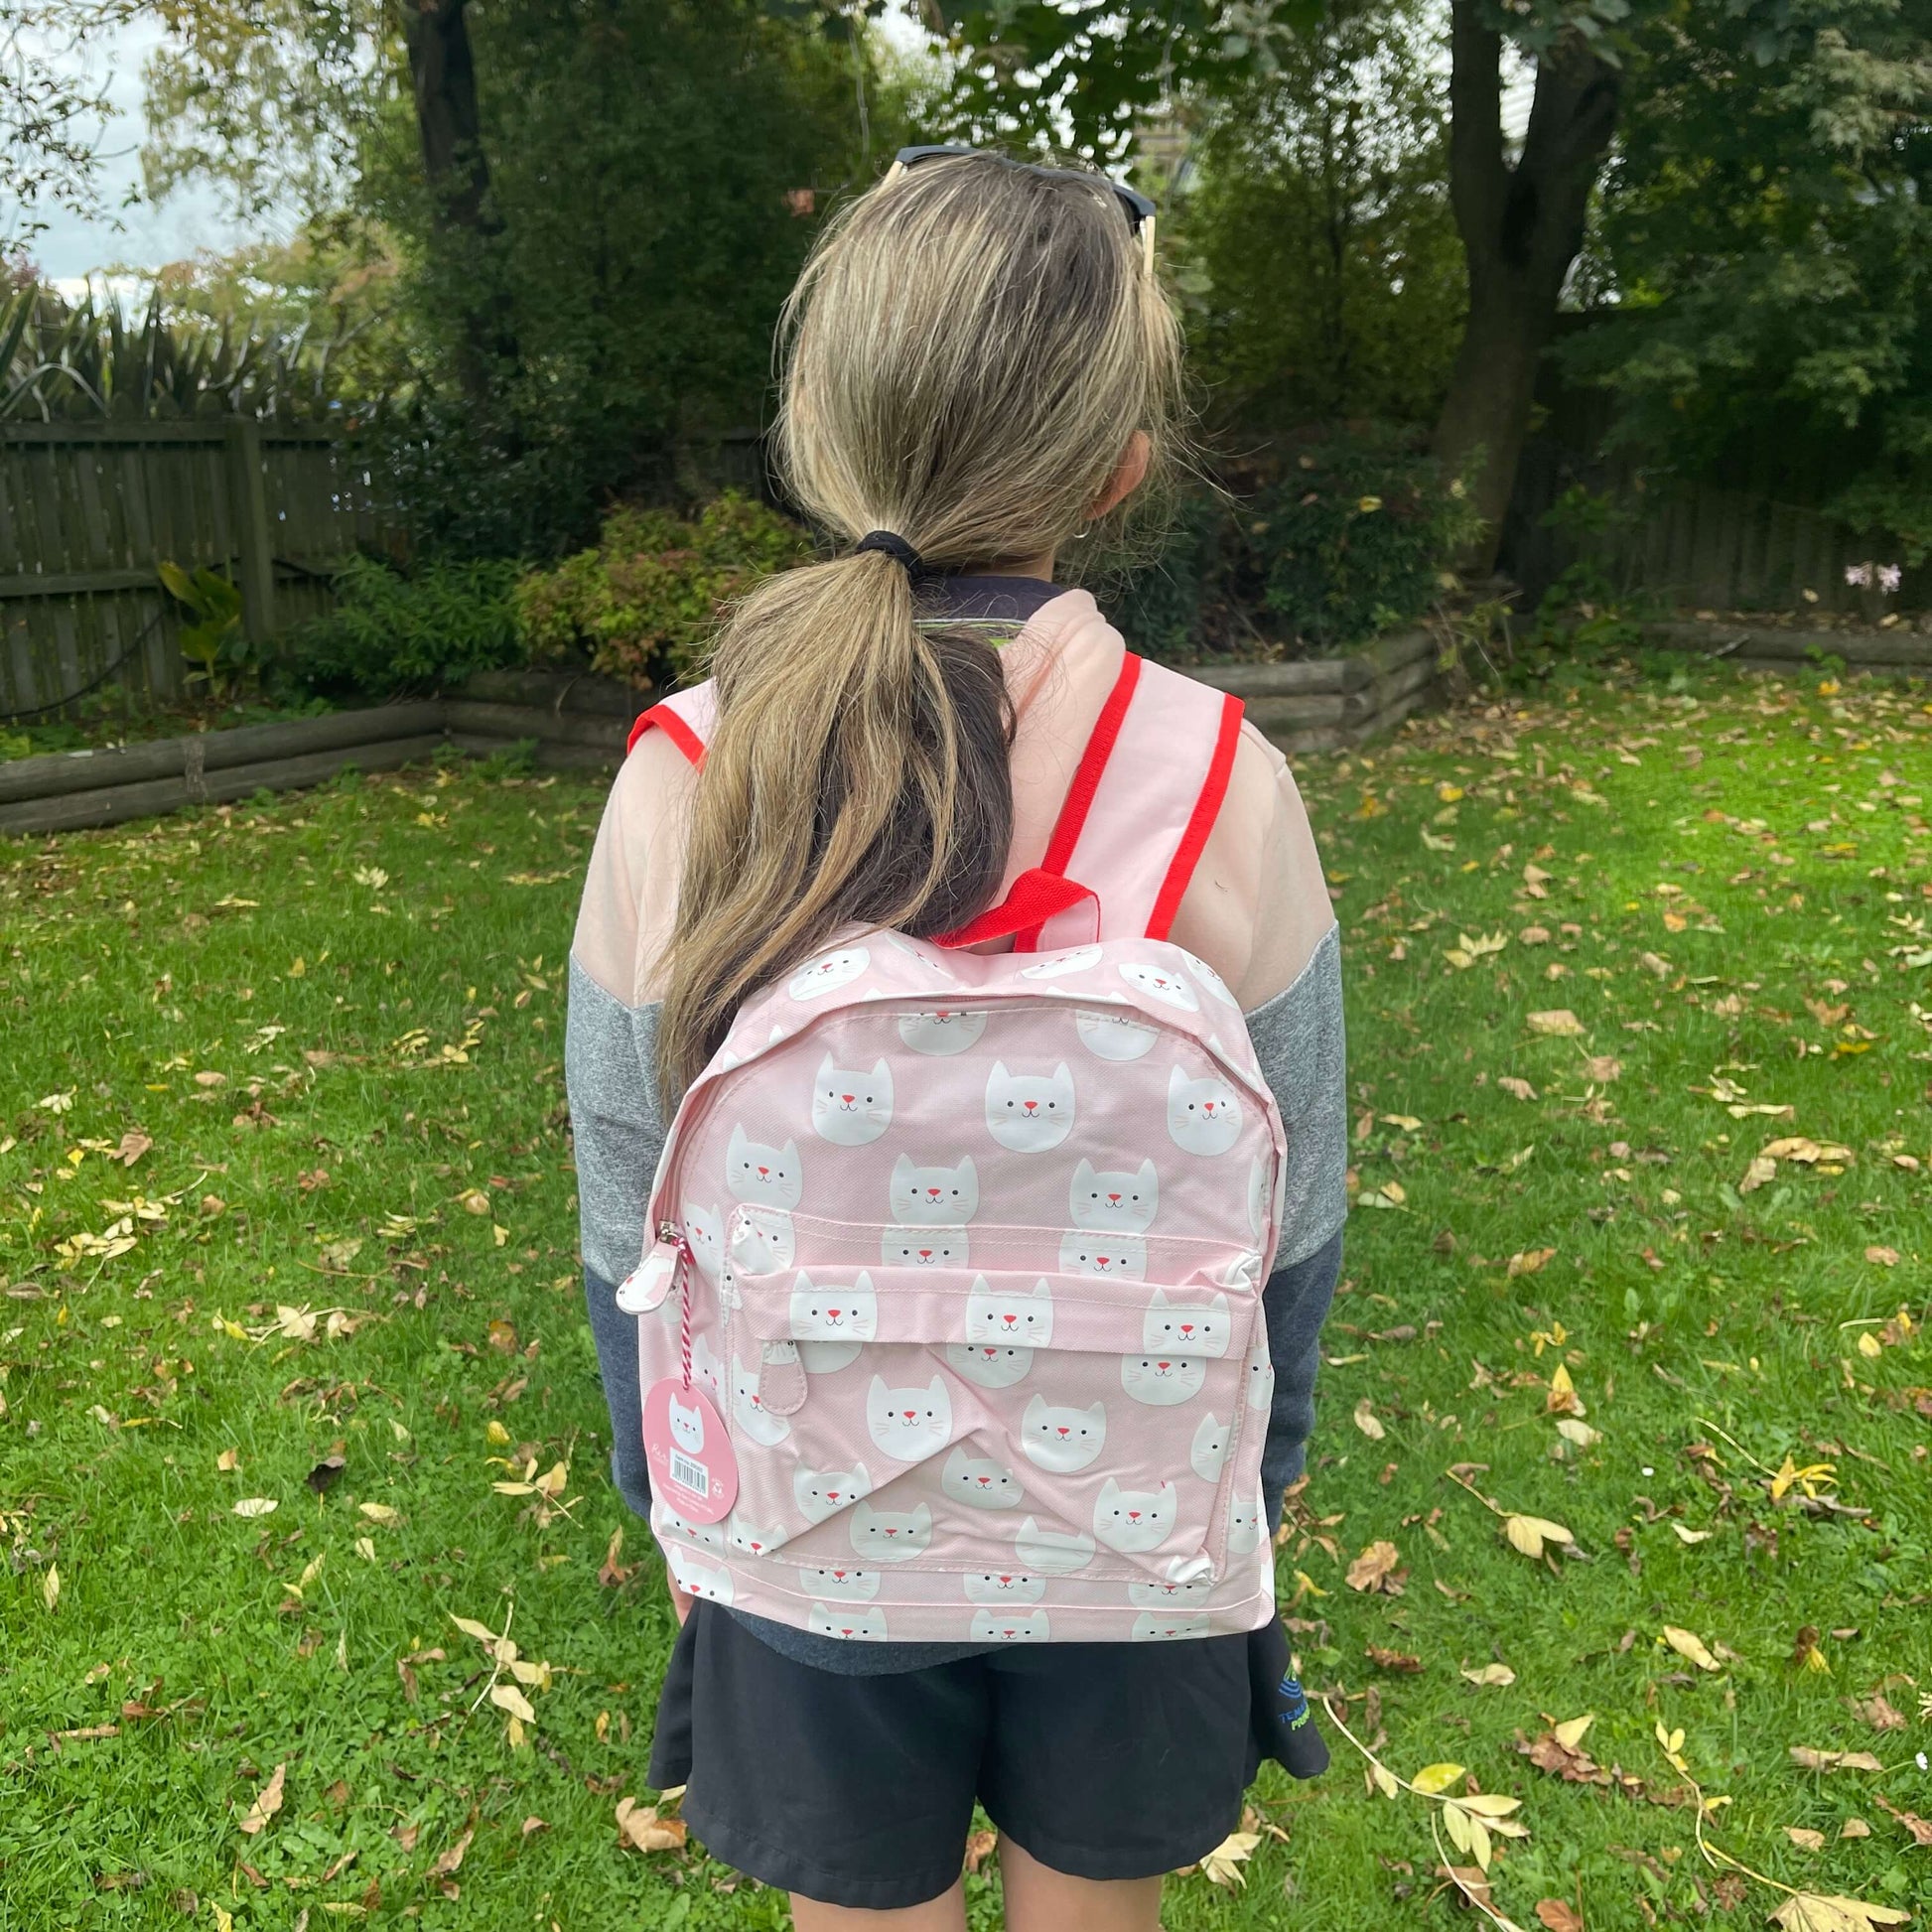 Girl wearing a pink backpack with white cat faces printed on it.